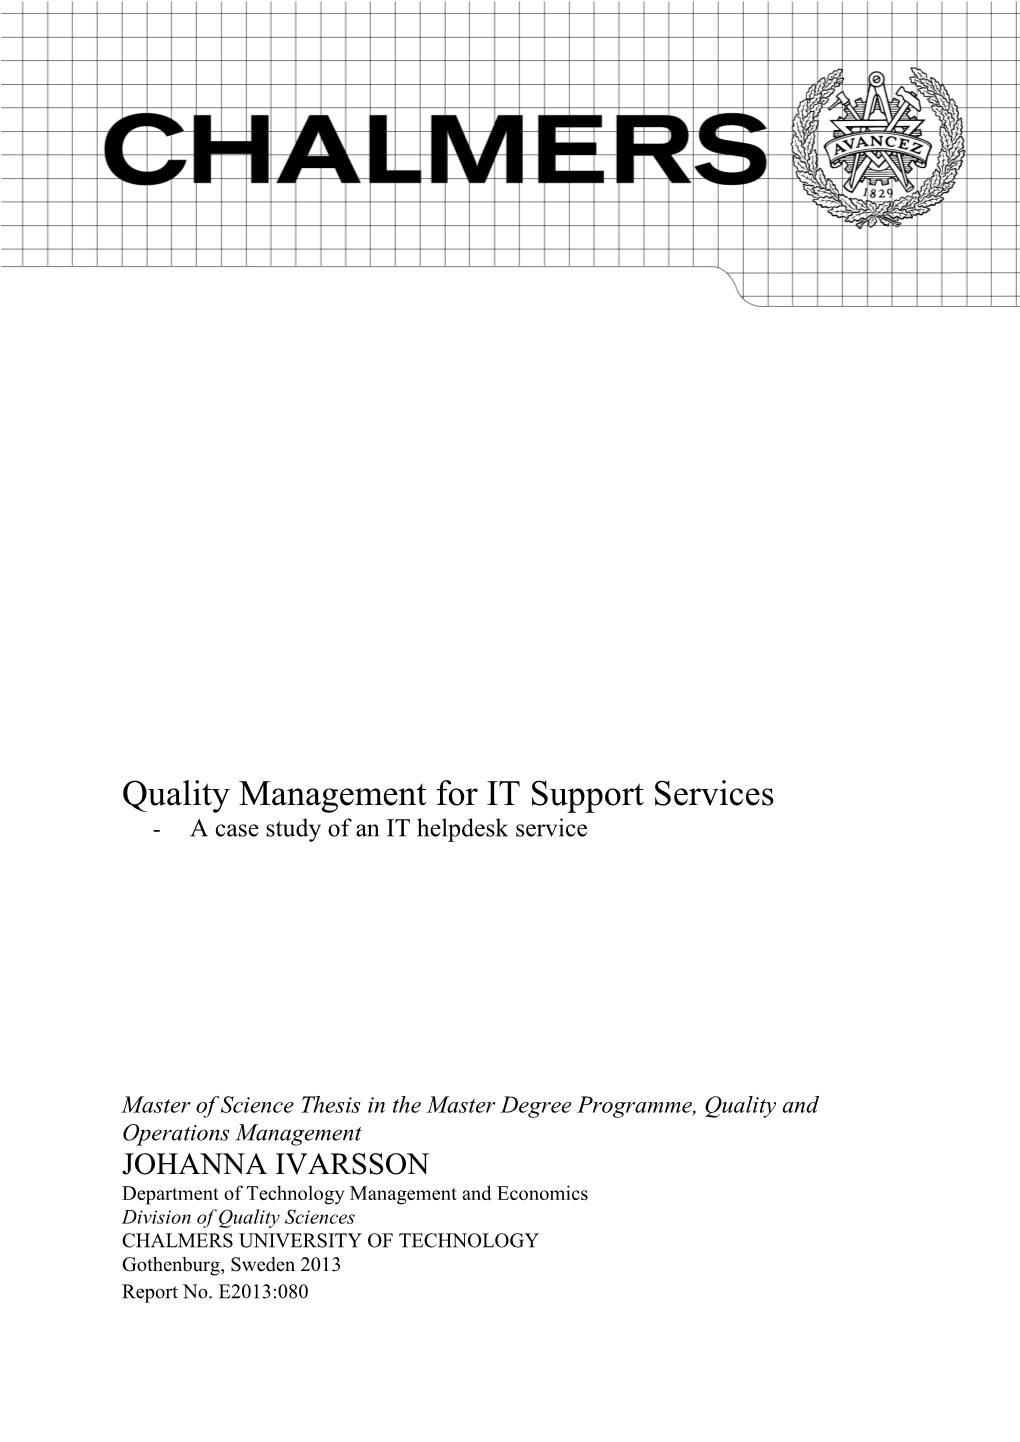 Quality Management for IT Support Services - a Case Study of an IT Helpdesk Service